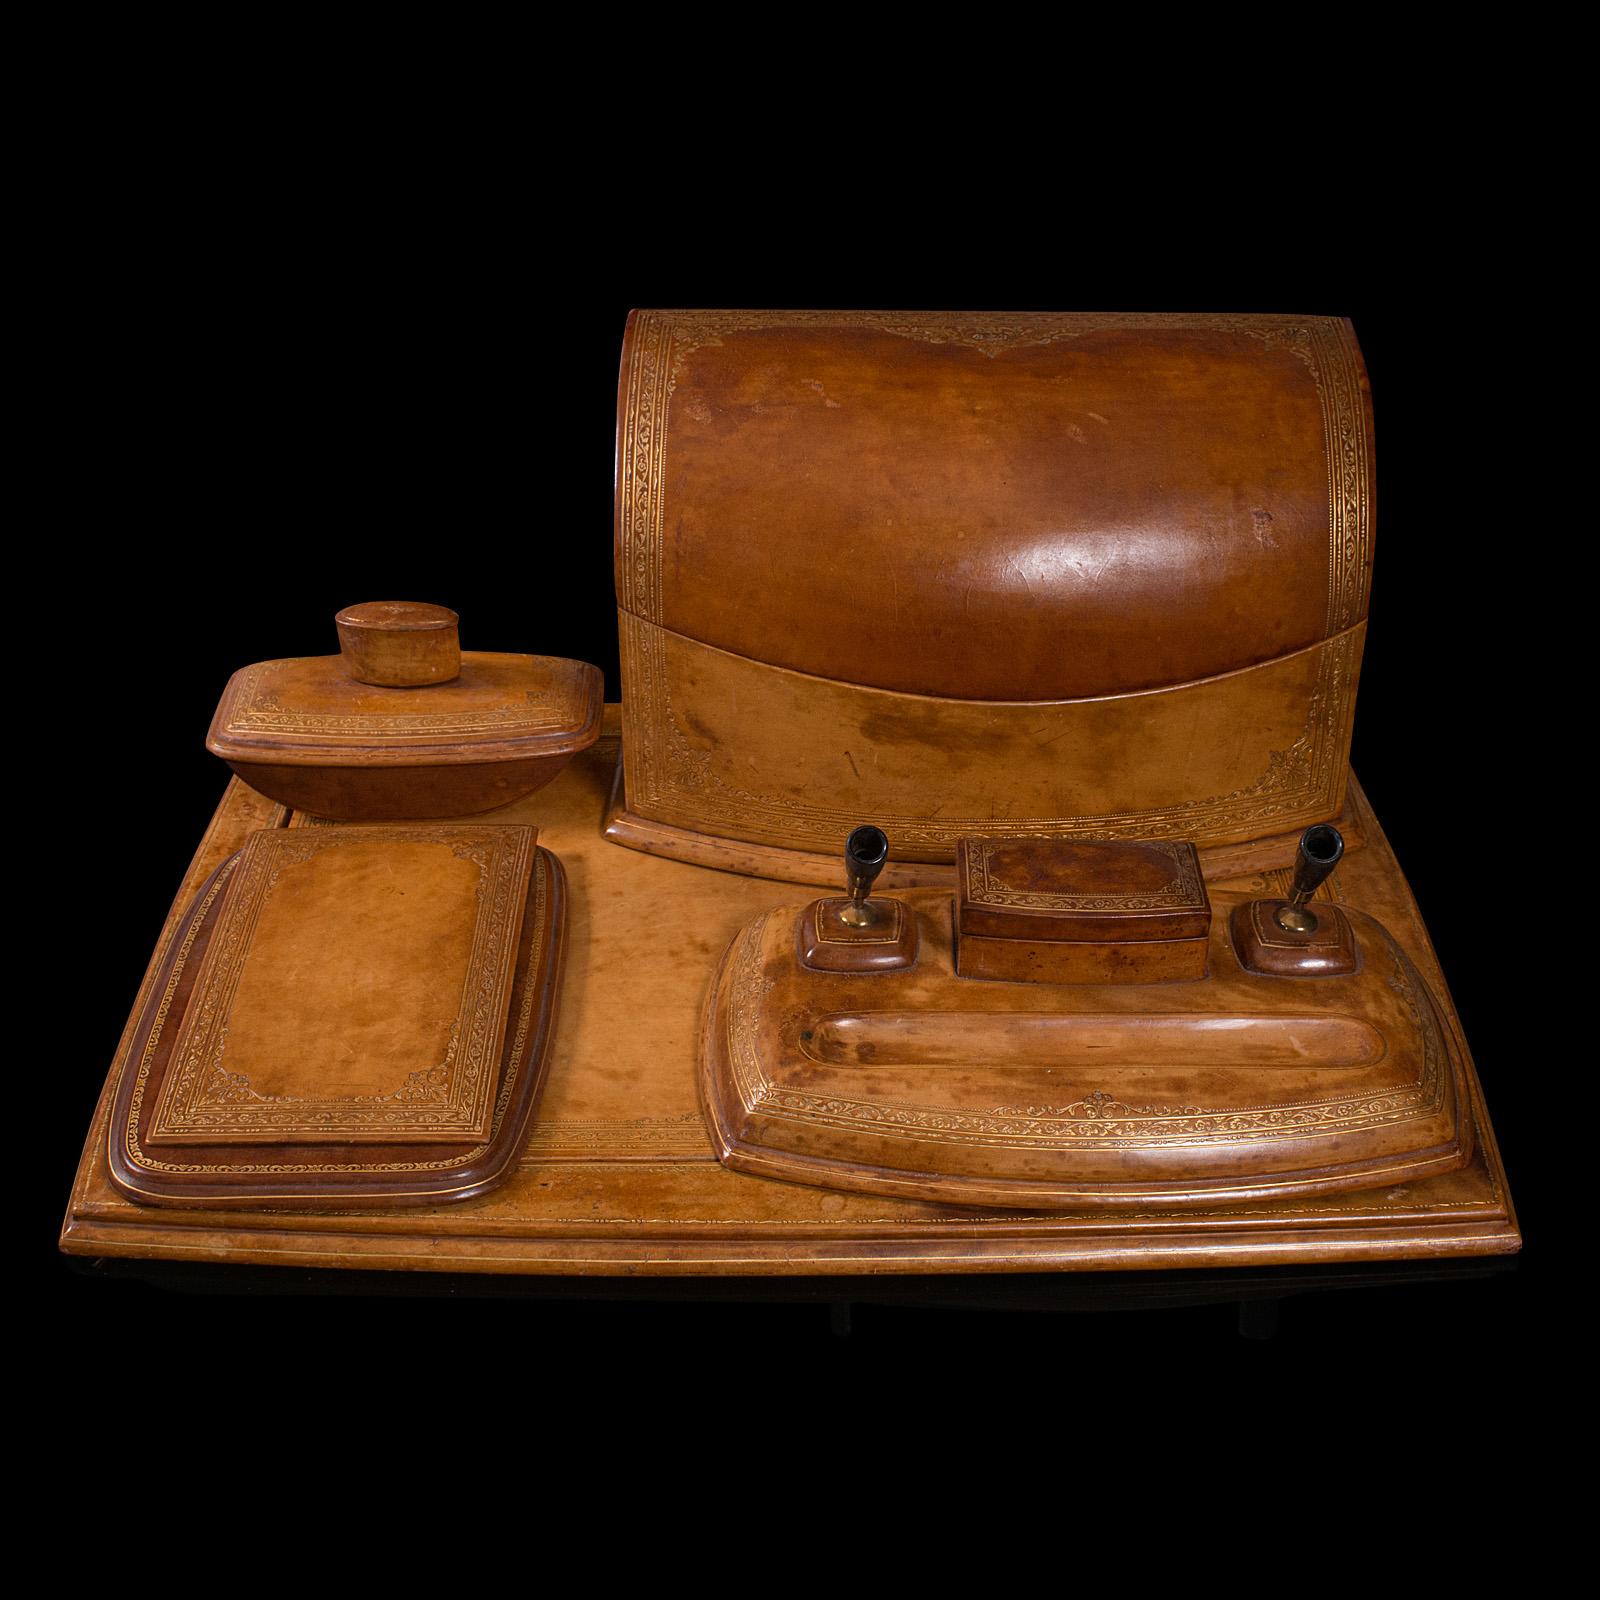 This is a quality vintage writing desk set. An English, leather table rest, pen stand and correspondence box by Asprey of London, dating to the early 20th century, circa 1930.

Of superb quality from a renowned London luxury goods store
Displays